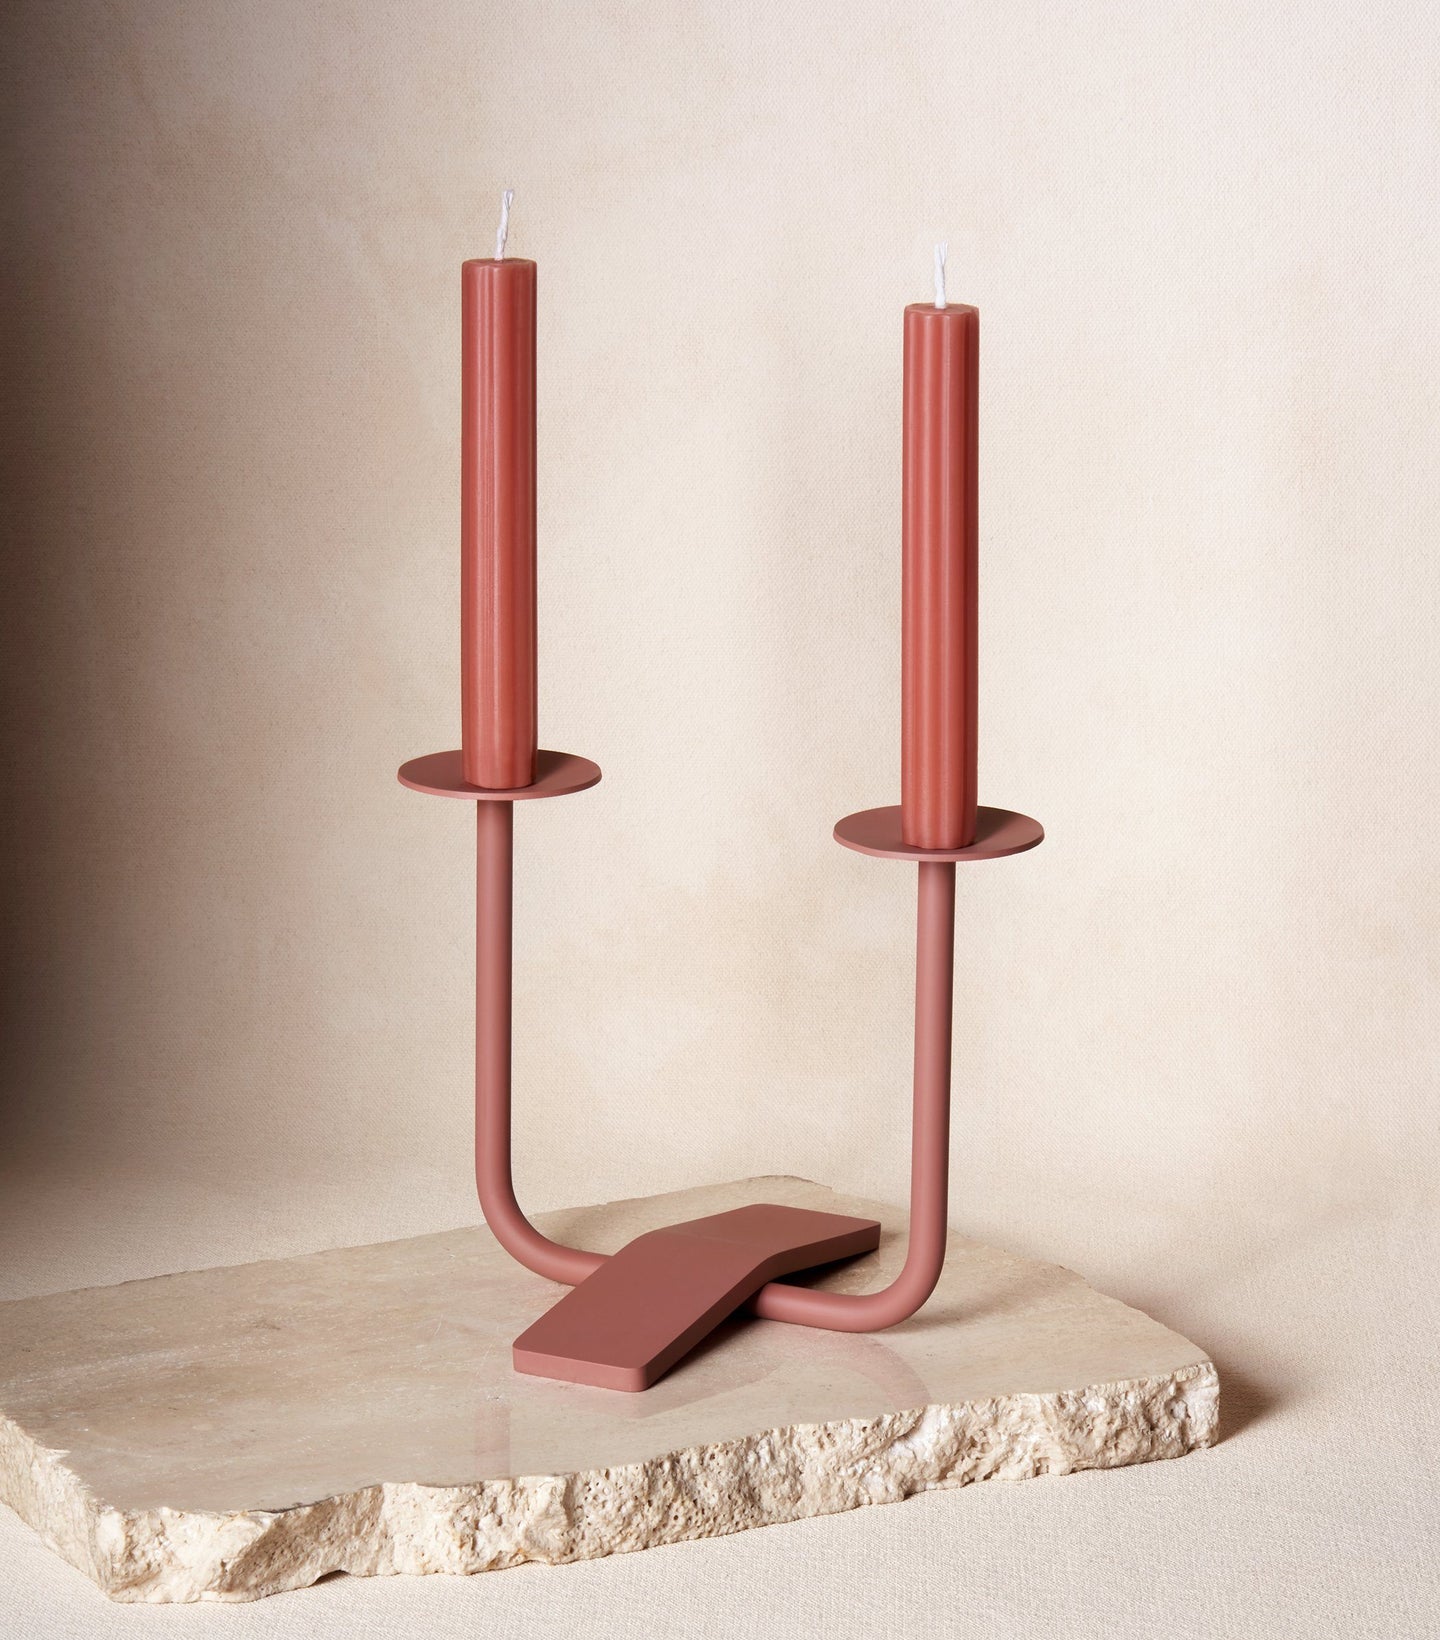 Load image into Gallery viewer, Two Shabbat Candles in Clay Red with Candle Holder
